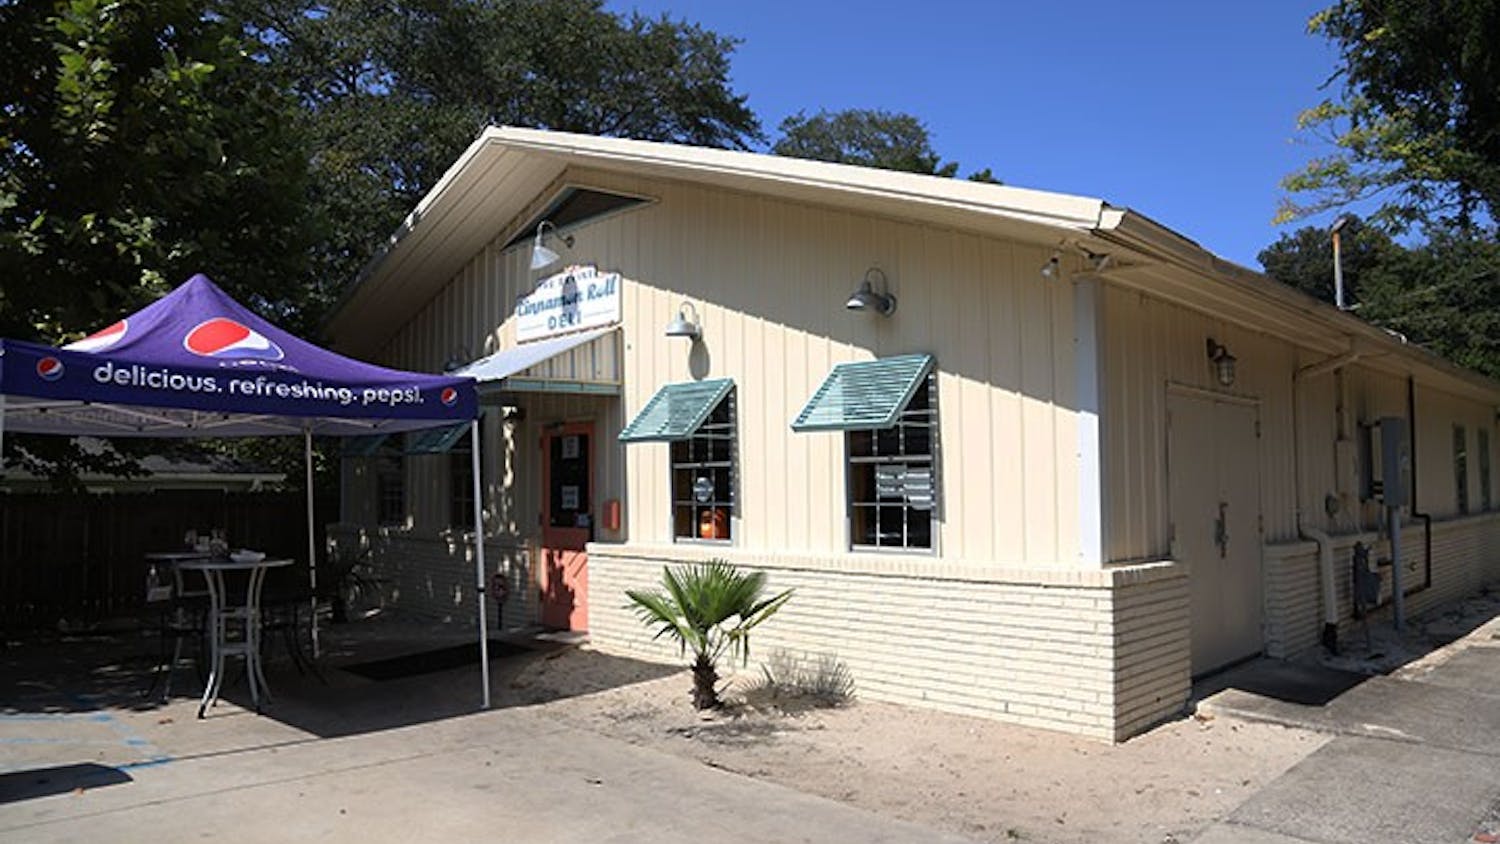 The storefront of Cinnamon Roll Deli is tucked away off Divine street.&nbsp;The Cinnamon Roll Deli is popular with students and the surrounding community.&nbsp;